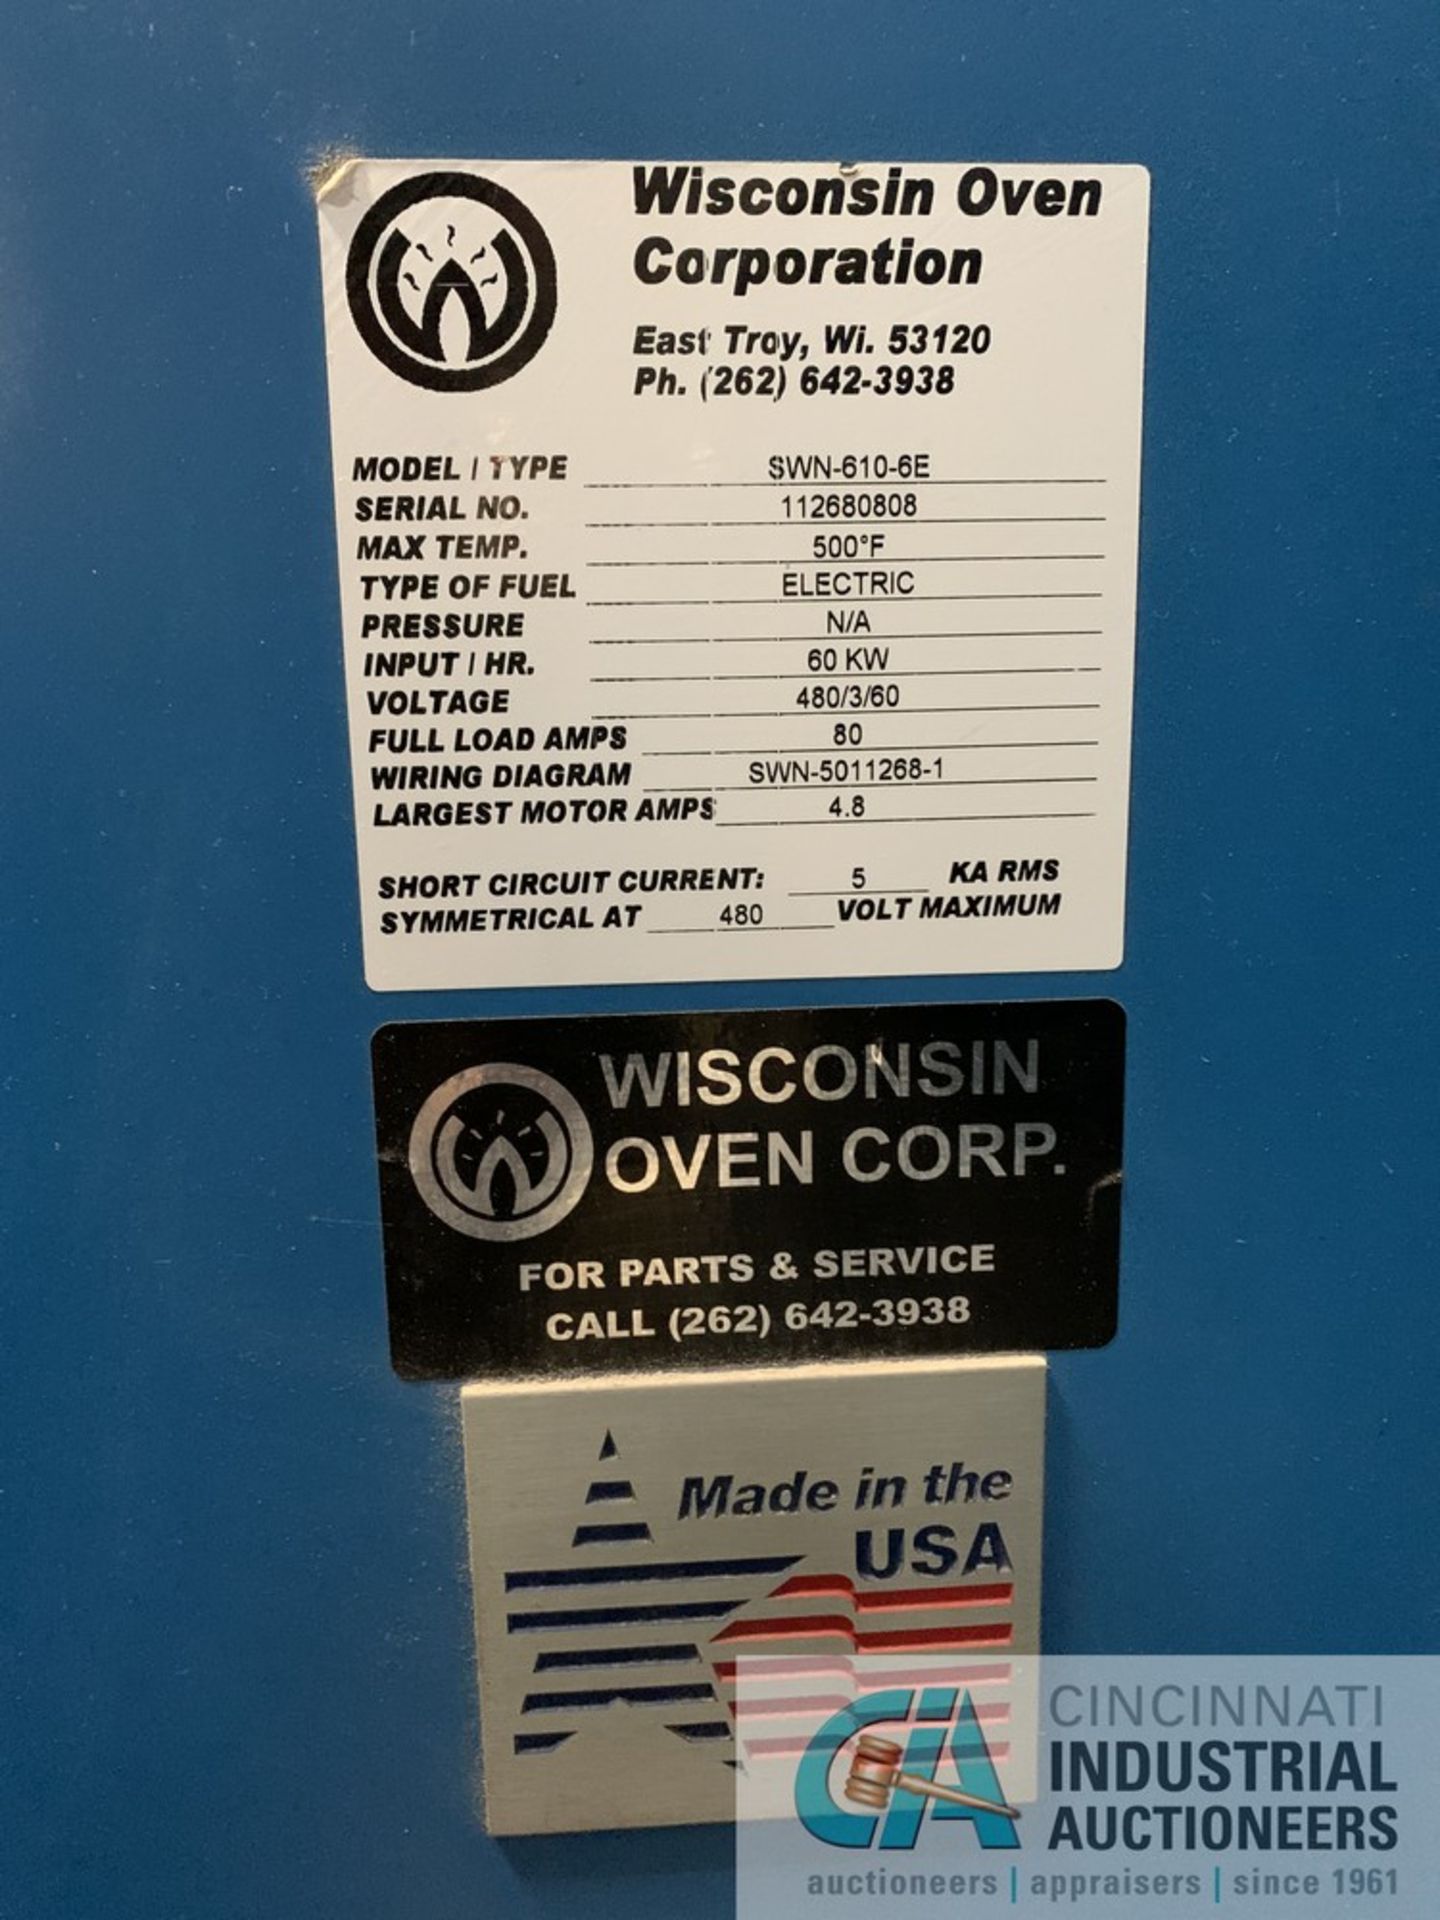 6' X 10' X 6' WISCONSIN OVEN MODEL SWN-610-6E ELECTRIC BATCH OVEN; S/N 112680808, 500 DEGREE, - Image 10 of 15